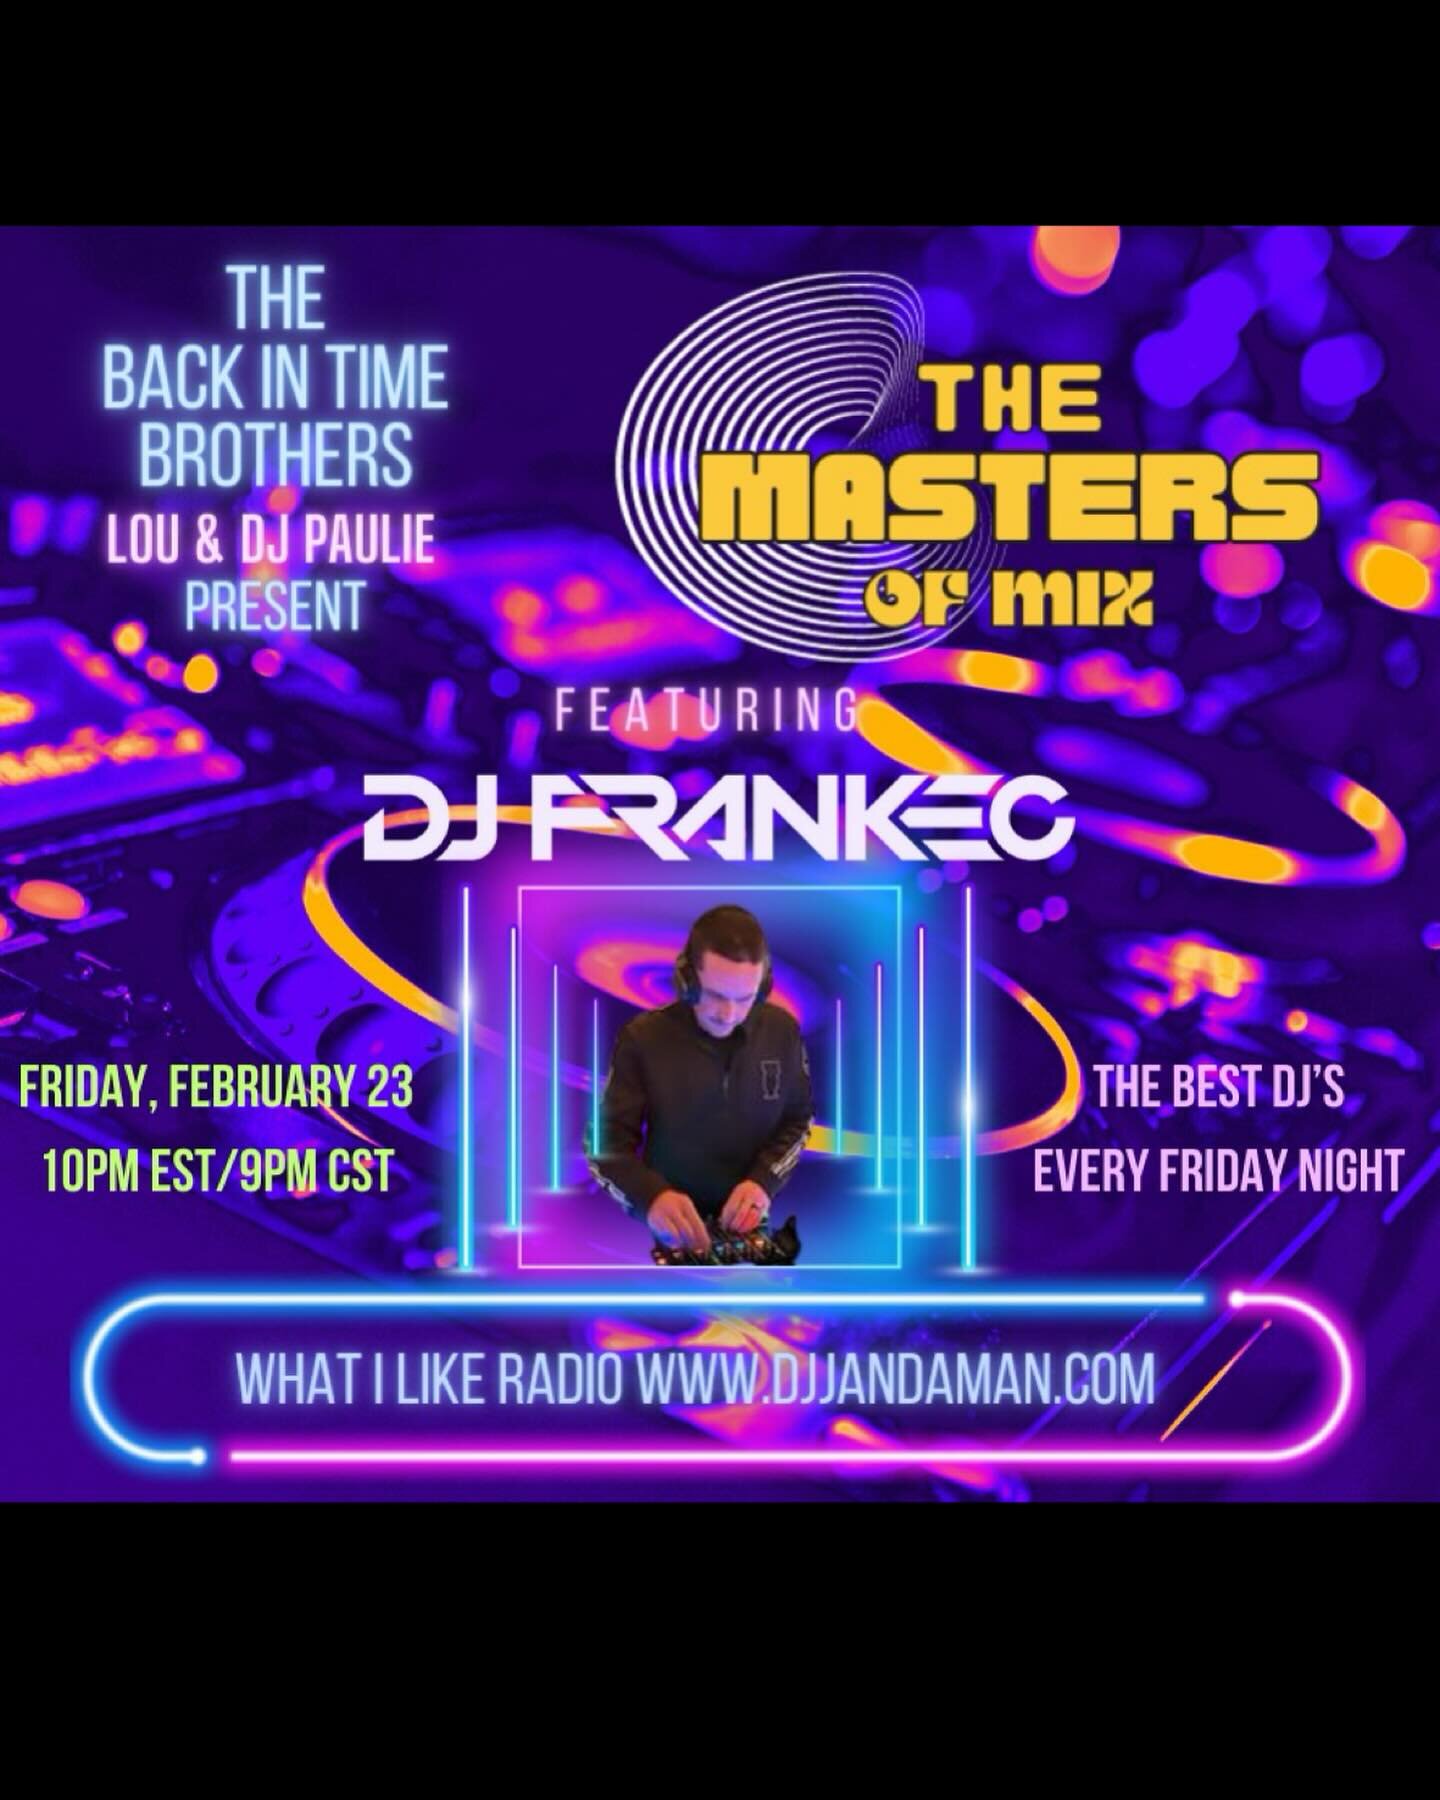 Listen in tonight 10pm eastern 🇺🇸 as I make my debut set on What I Like Radio. 1 hour of high energy dance hits mixed by @djfrankec 

Listen on #tuneinradio @tunein 

http://tun.in/sfl7E

Broadcast also available on :

http://djjandaman.com/What%20